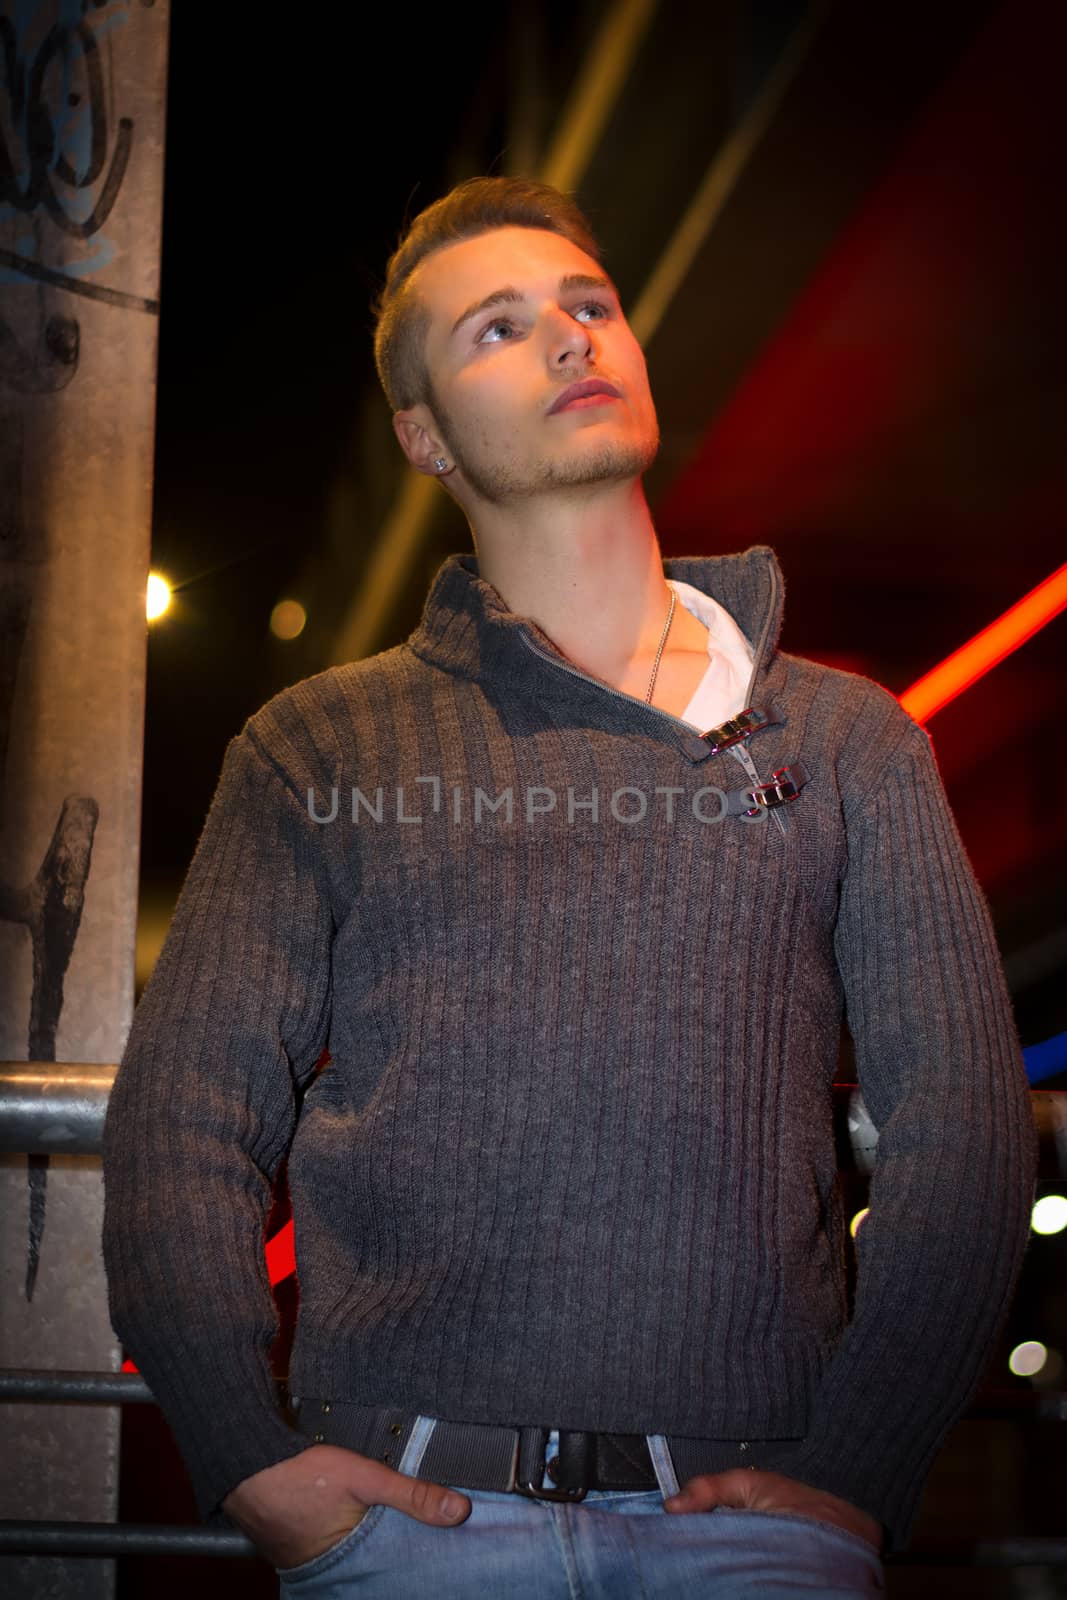 Handsome blond young man alone in urban setting by artofphoto